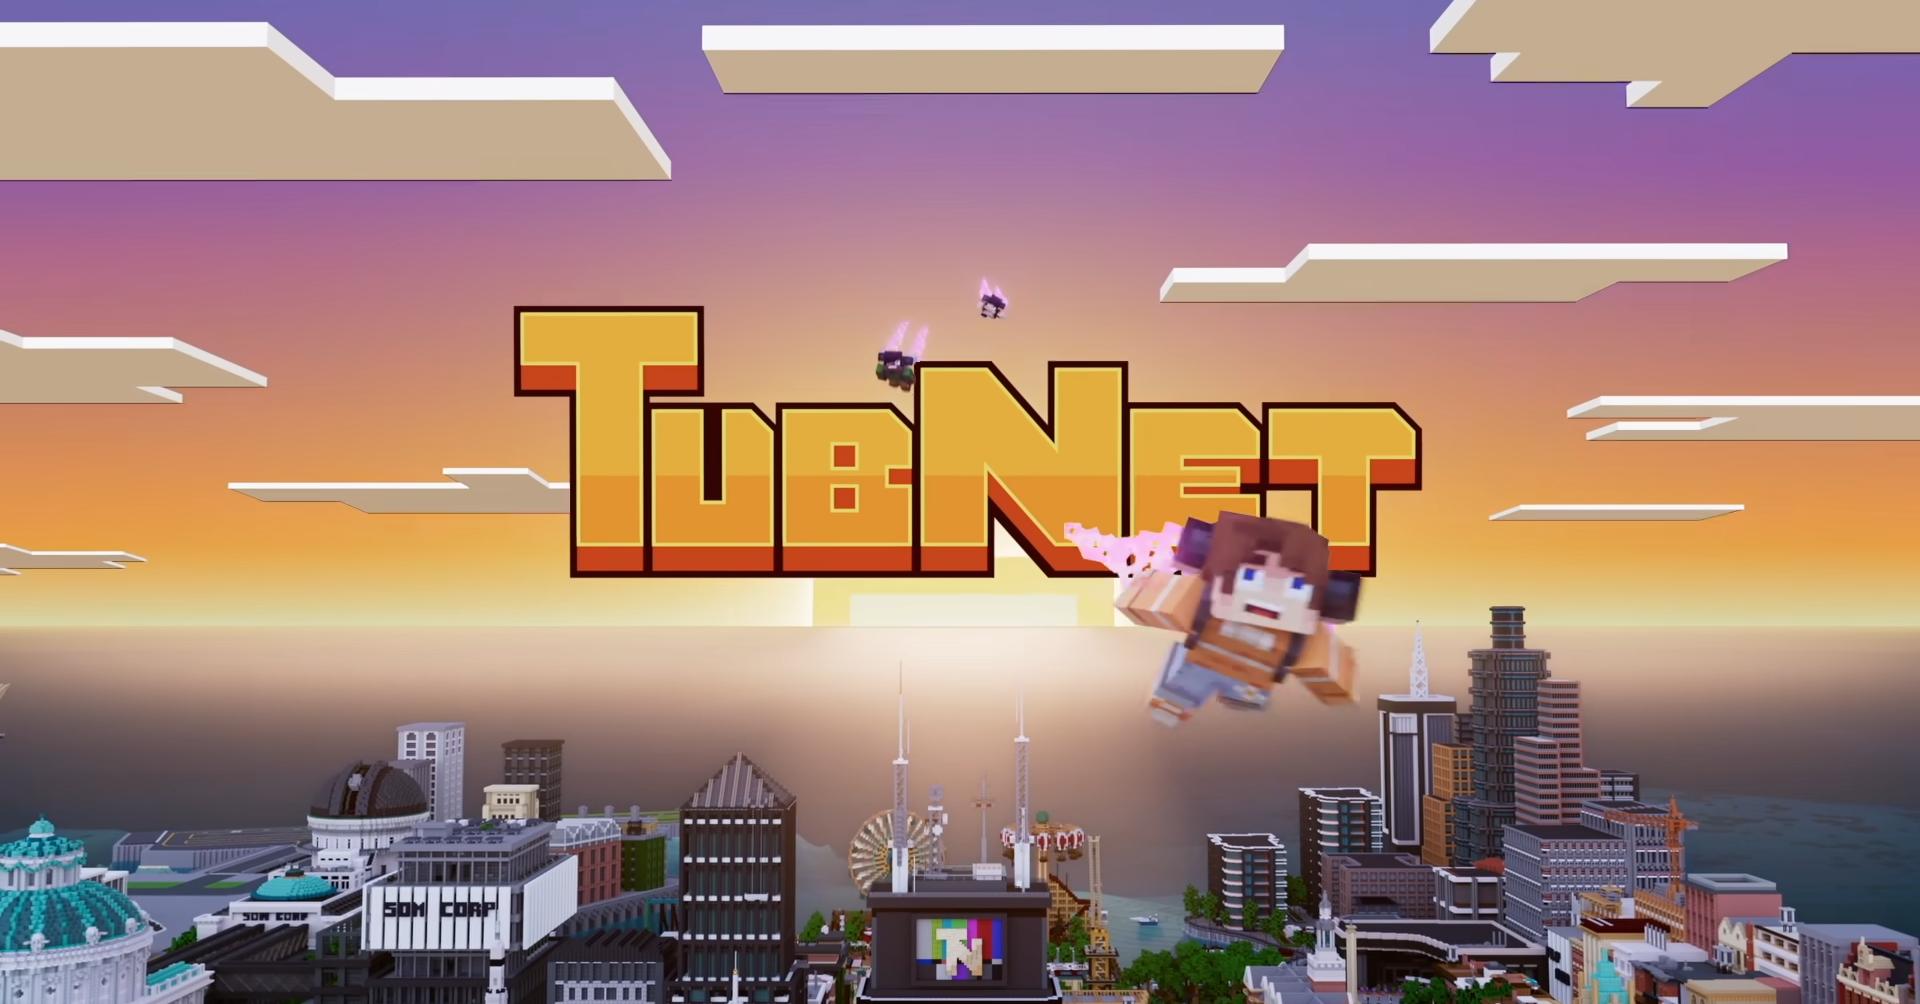 What Is Tubnet